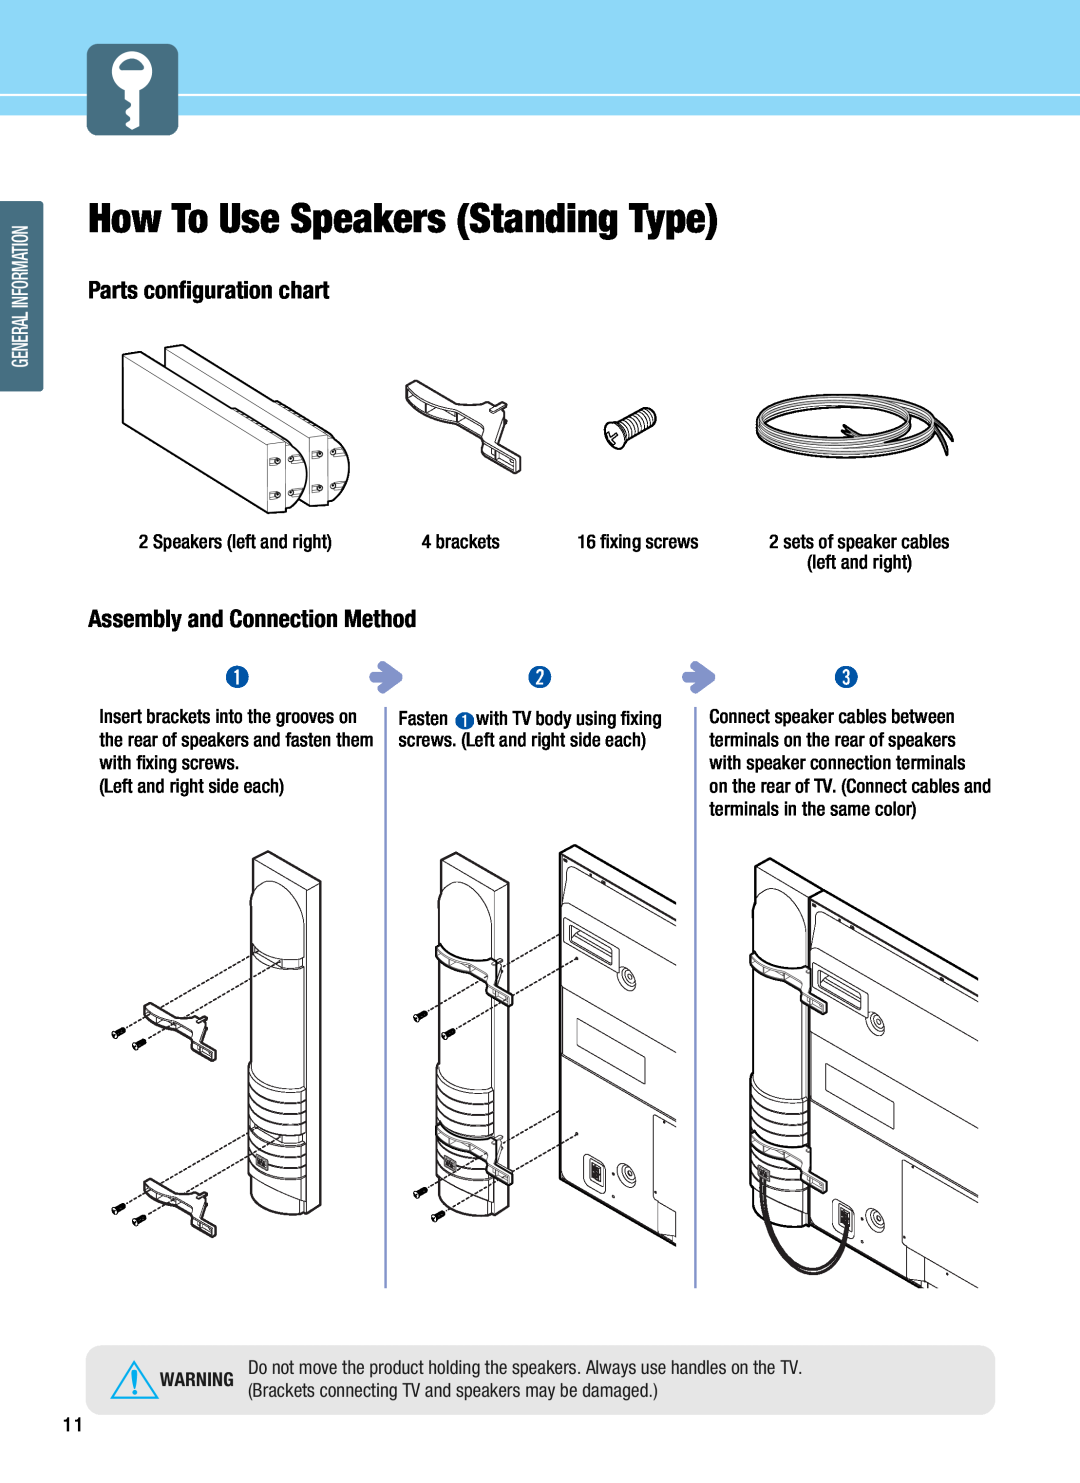 Hyundai Q501, Q421S, Q421H How To Use Speakers Standing Type, Parts configuration chart, Assembly and Connection Method 